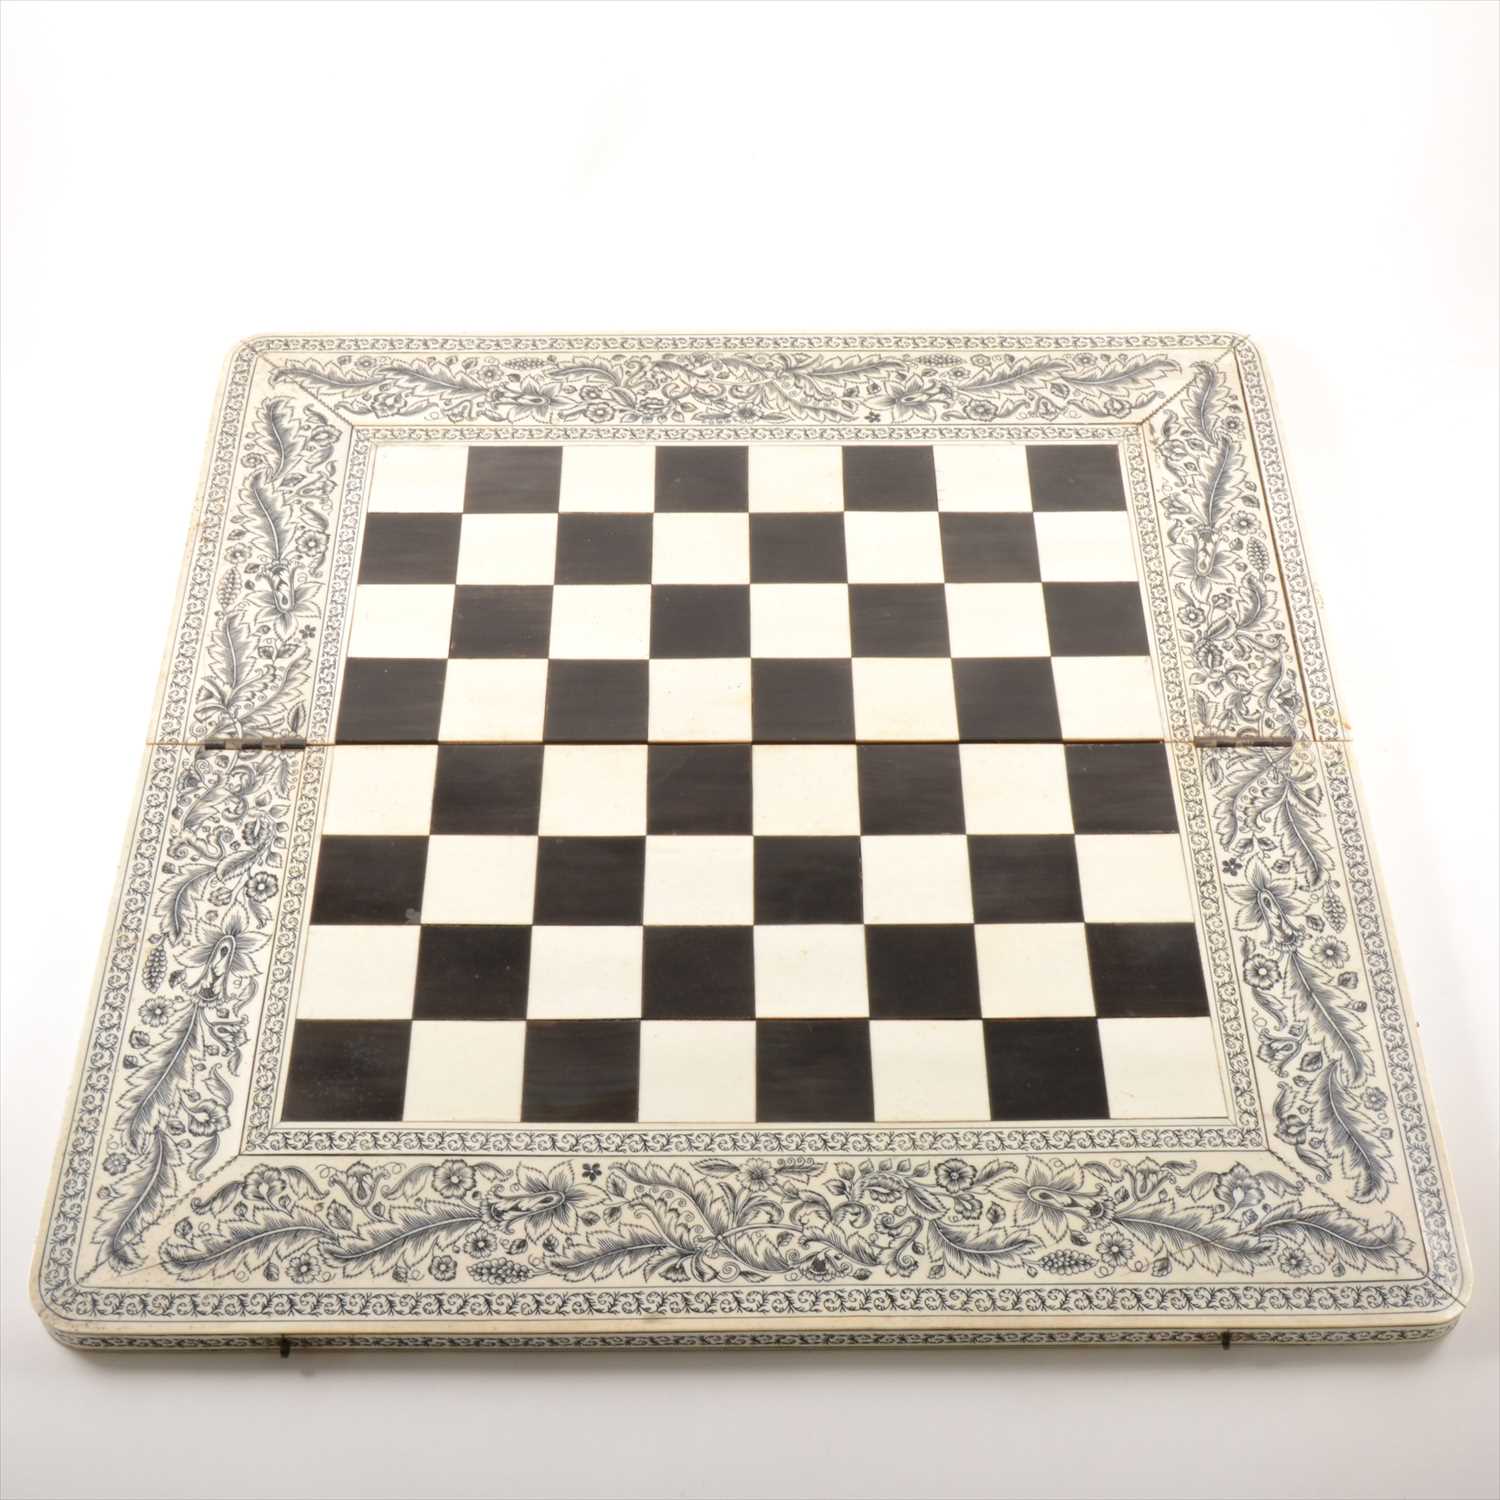 Lot 540 - Anglo-Indian sandalwood and ivory folding chess board, Vizagapatam, late 19th century.